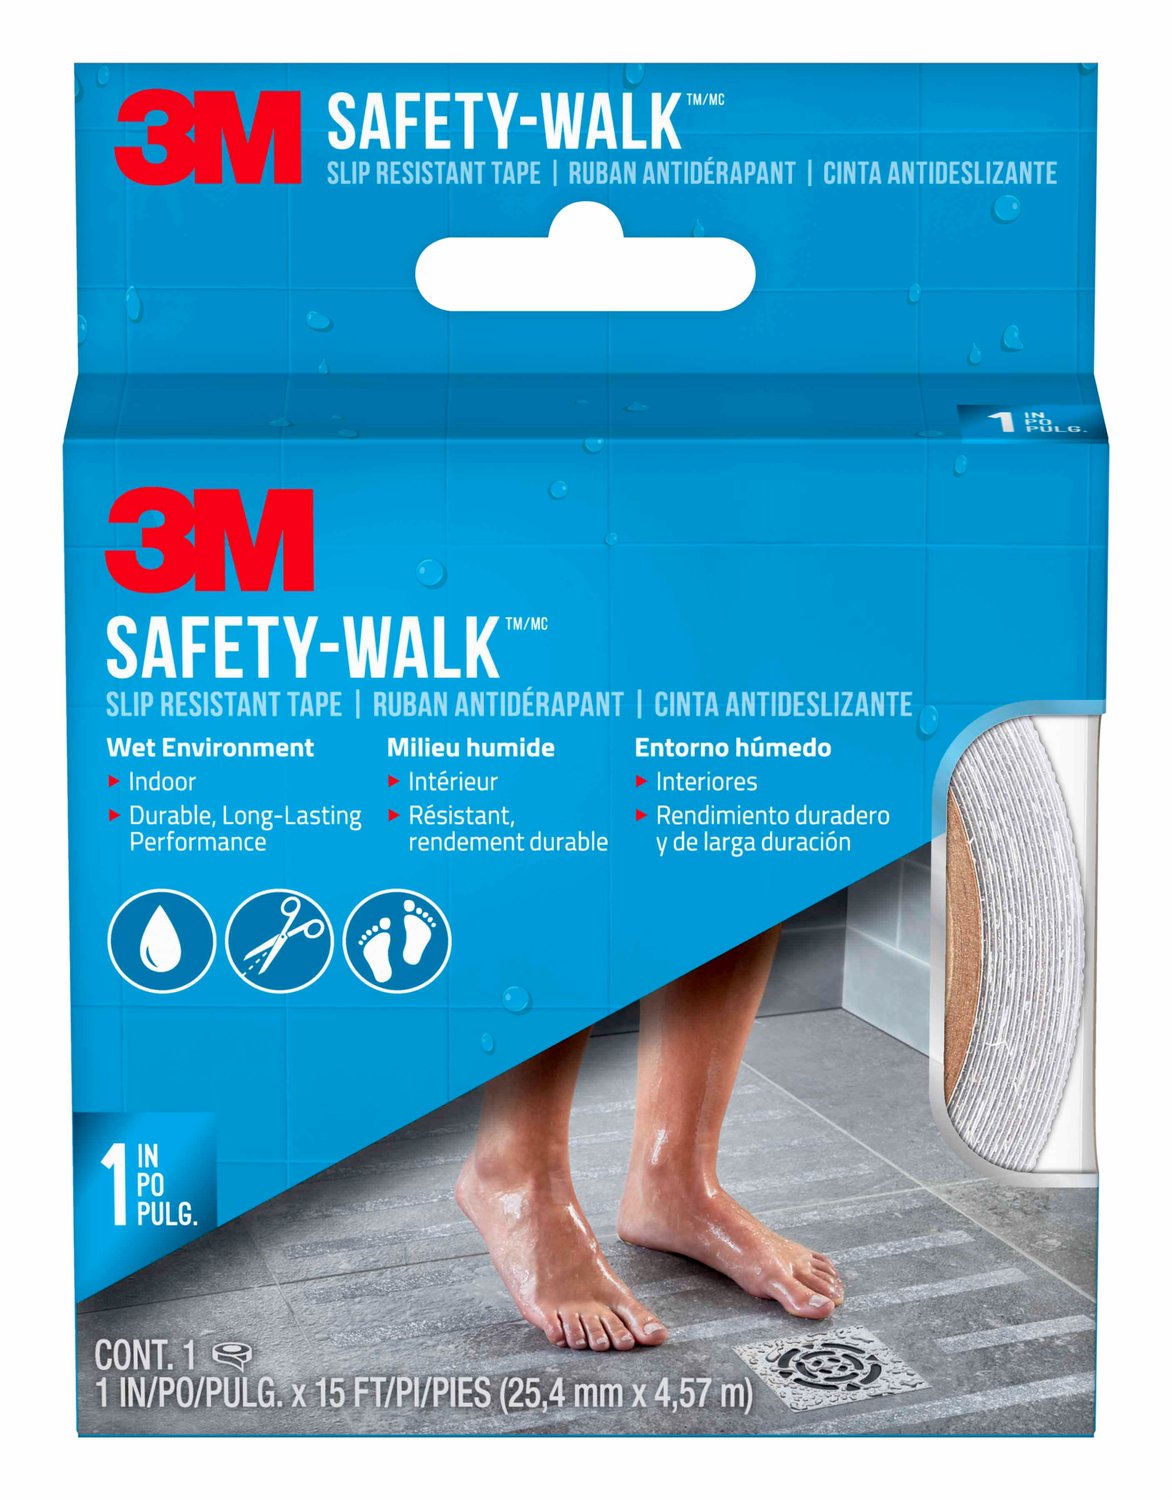 7100173148 - 3M Safety-Walk Slip Resistant Tape, 220C-R1X180, 1 in x 15 ft, Clear